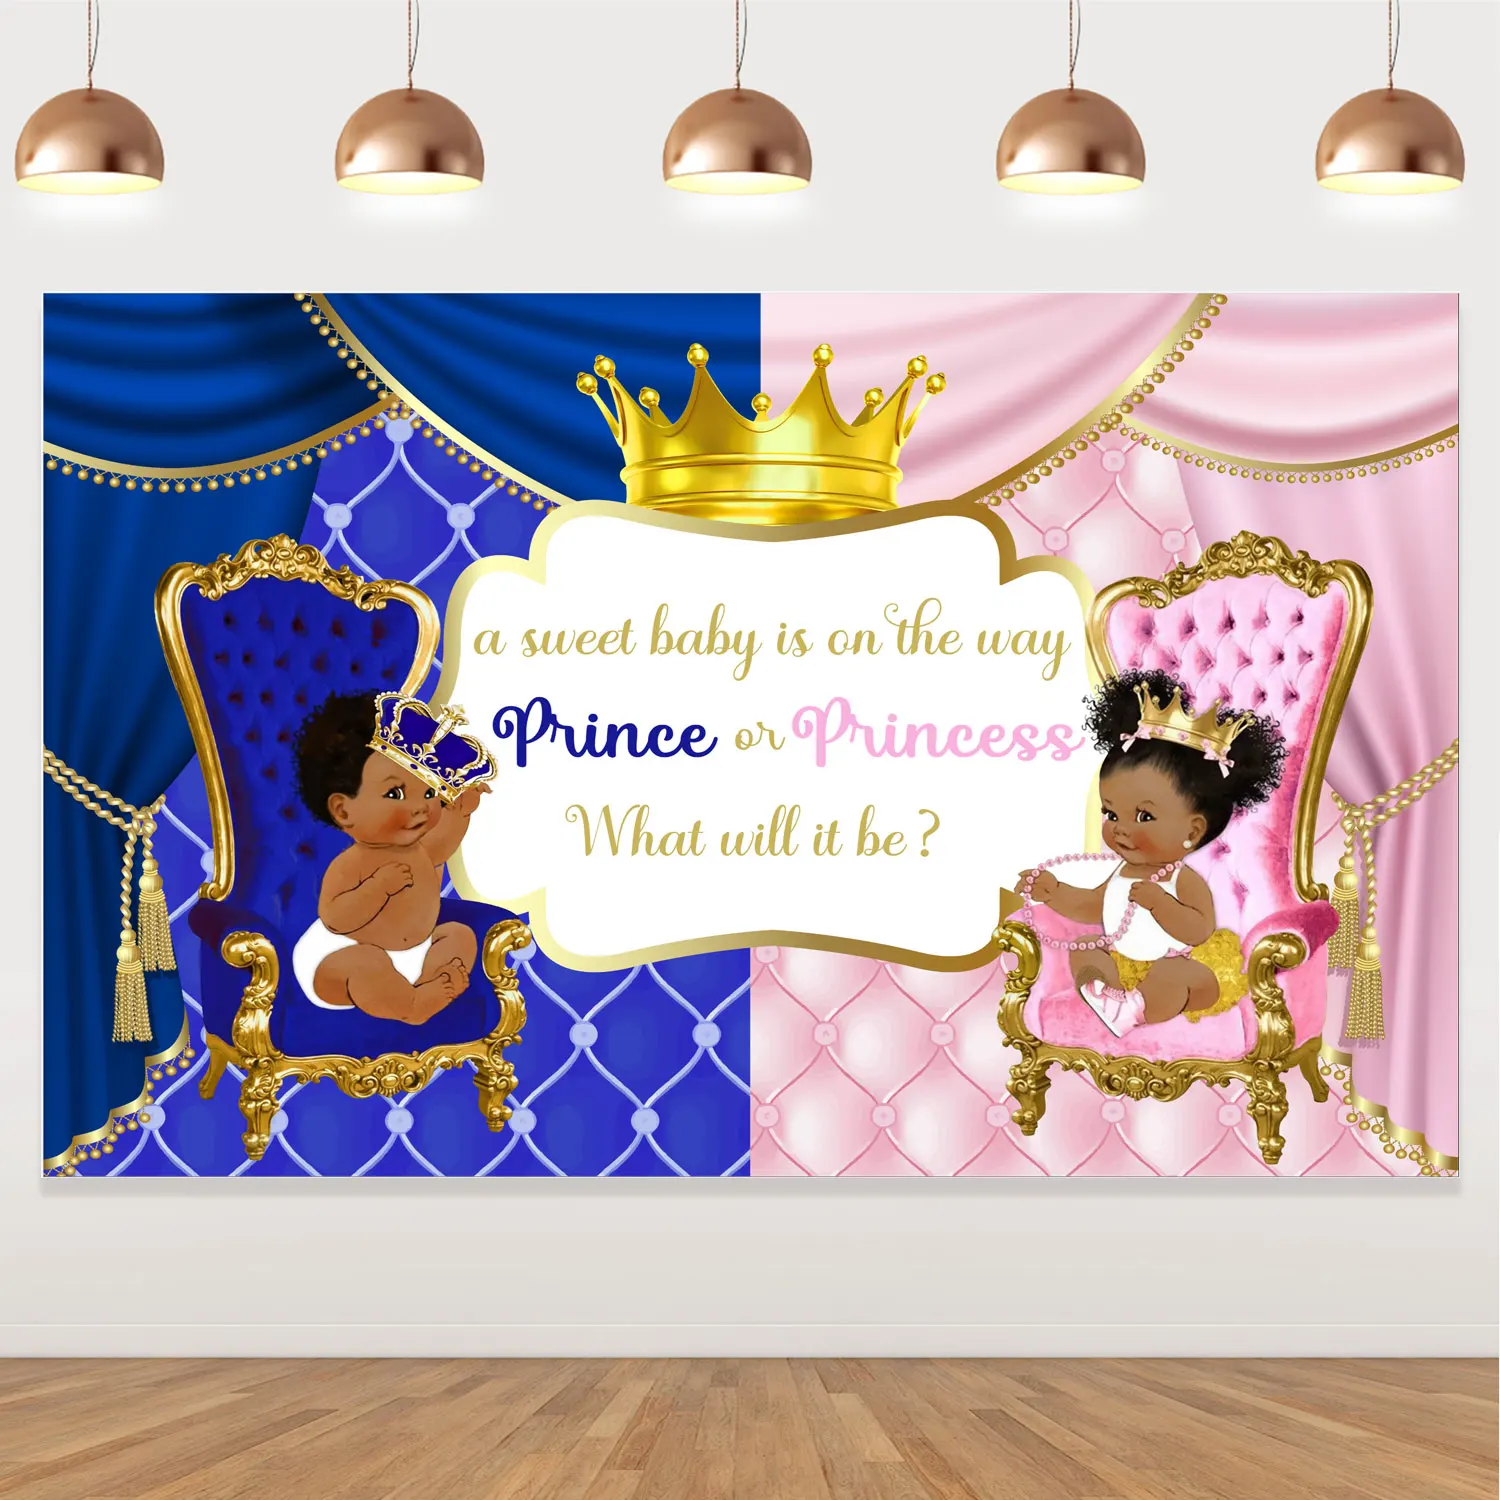 

Crown Theme Gender Reveal Party Decor, A Sweet Baby Is on the Way Prince or Princess What Will It Be Backdrop, Party Supplies